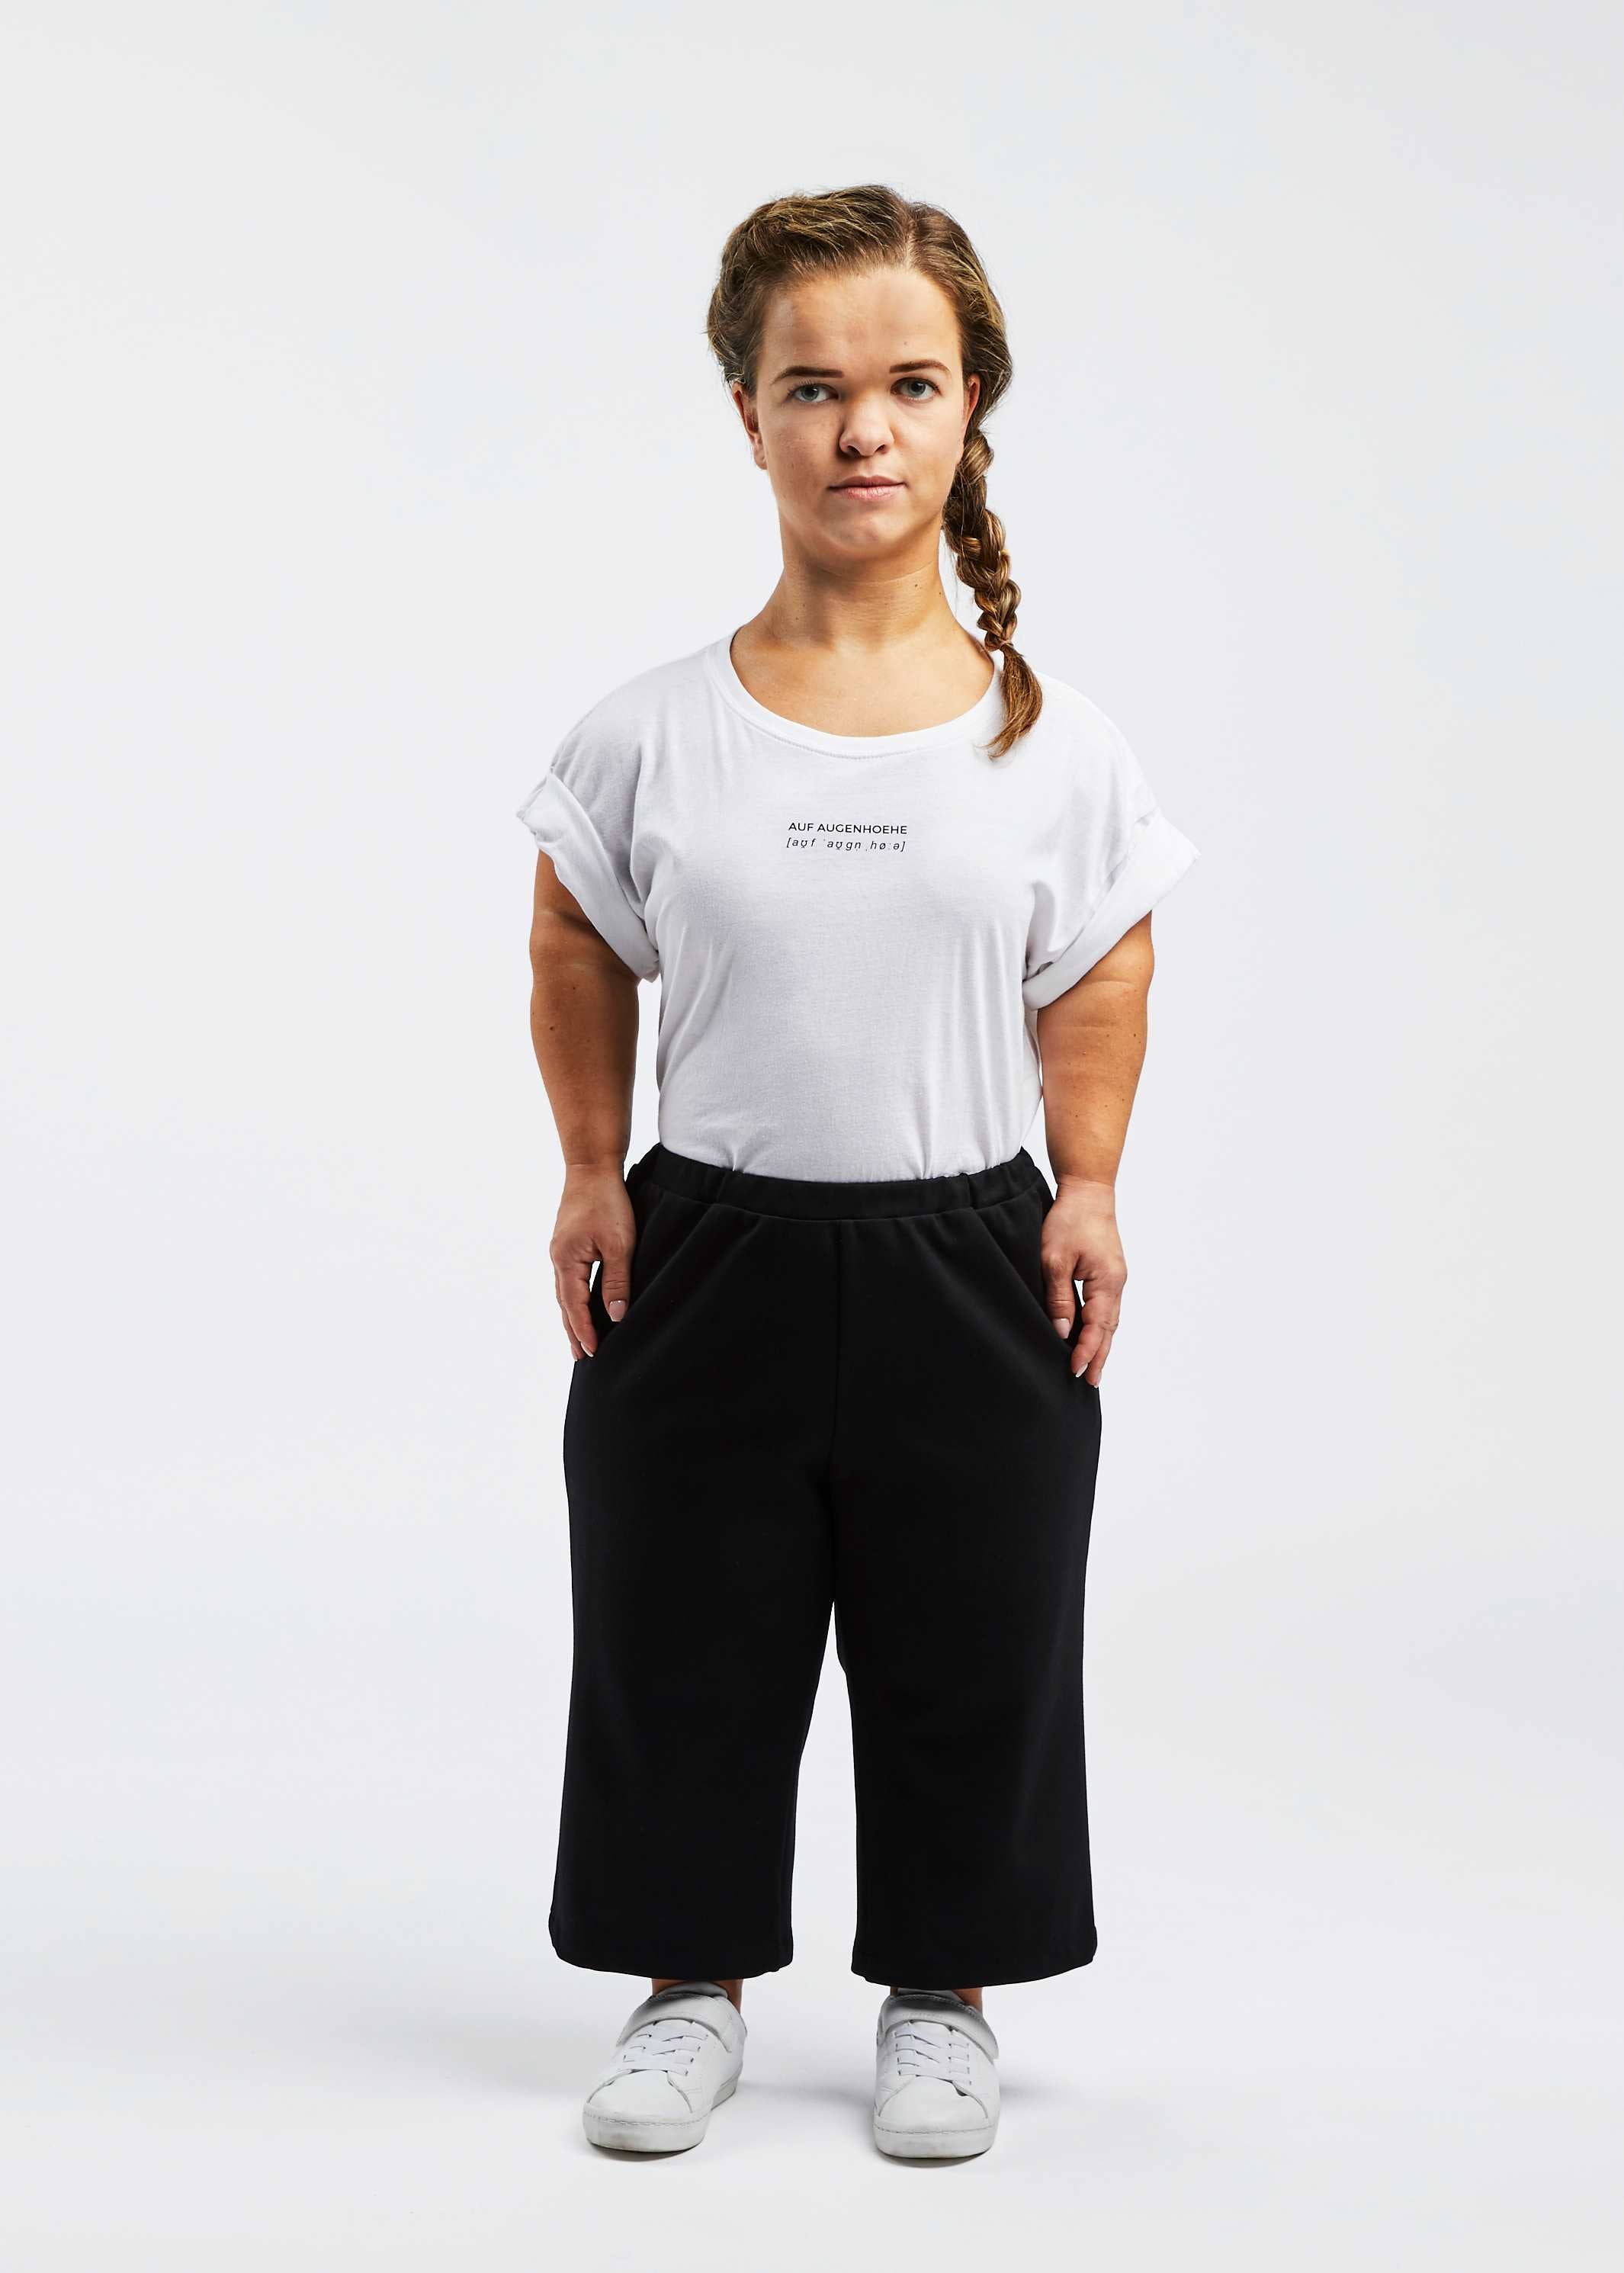 woman with dwarfism wearing black pants and white shirt